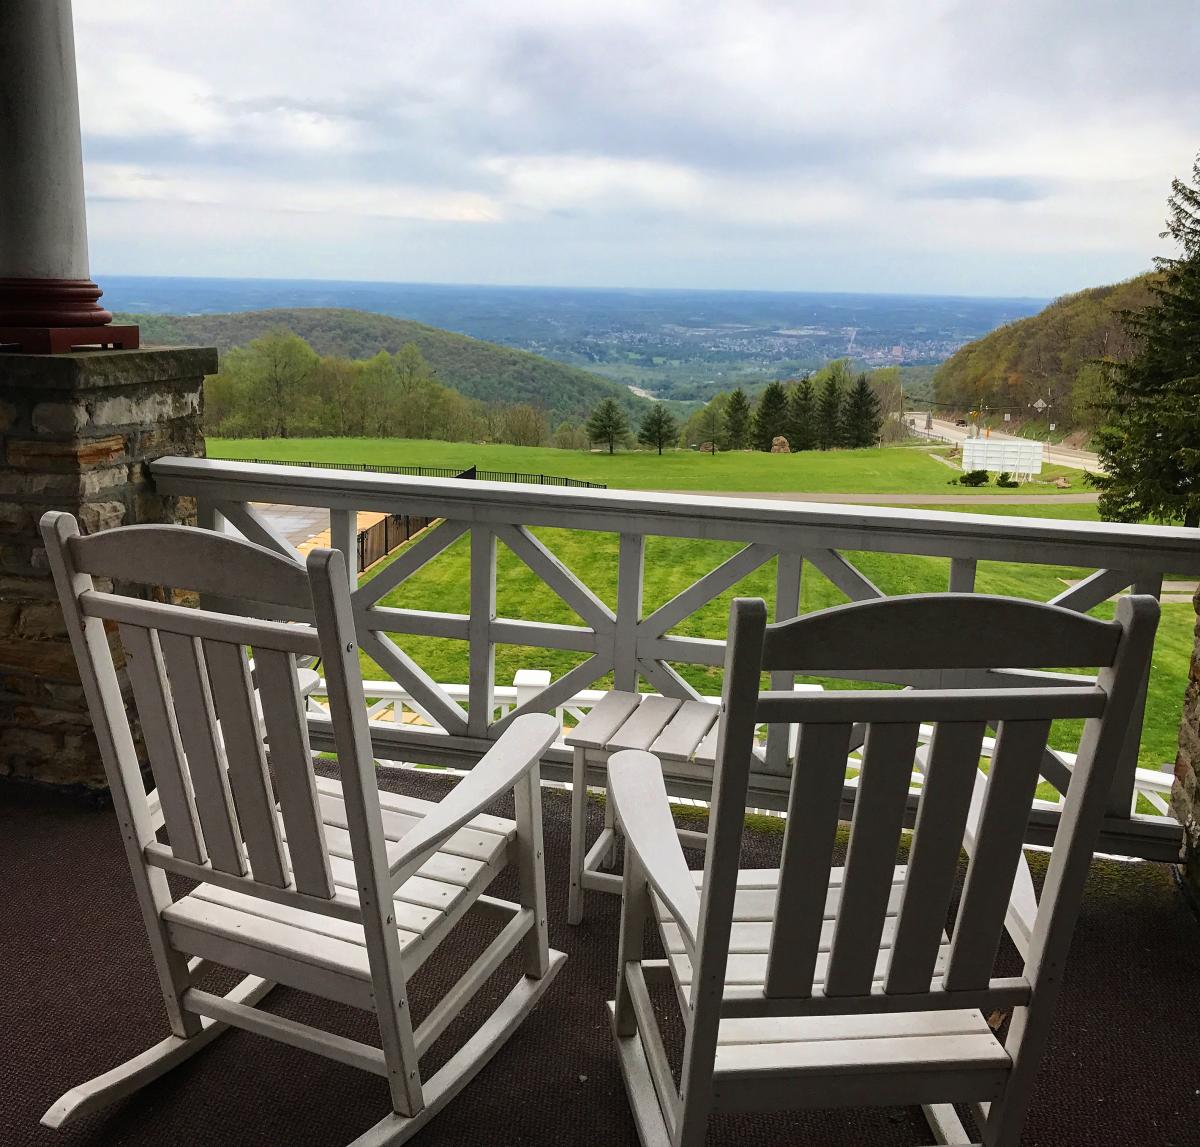 View from the porch at The Historic Summit Inn